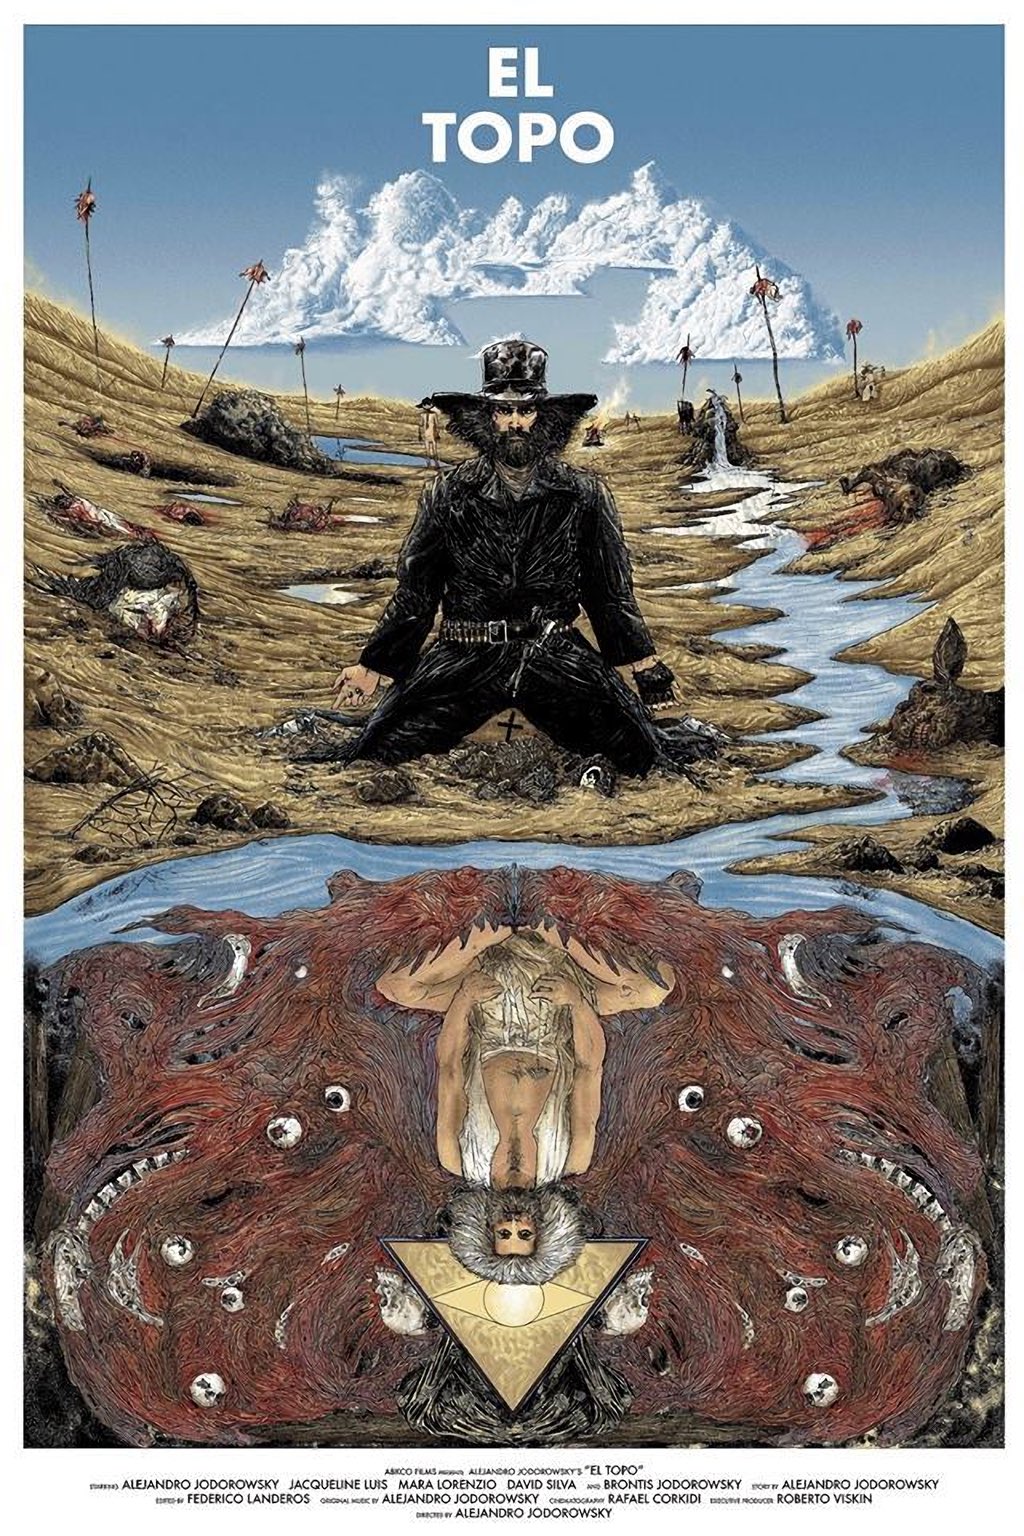 Alejandro Jodorowsky #Repost ・・・ Alejandro Jodorowsky's EL TOPO (aka The Original Midnight Movie) Will Be Presented In Its 4k Restoration As A Double Feature Paired With His Brand New Documentary